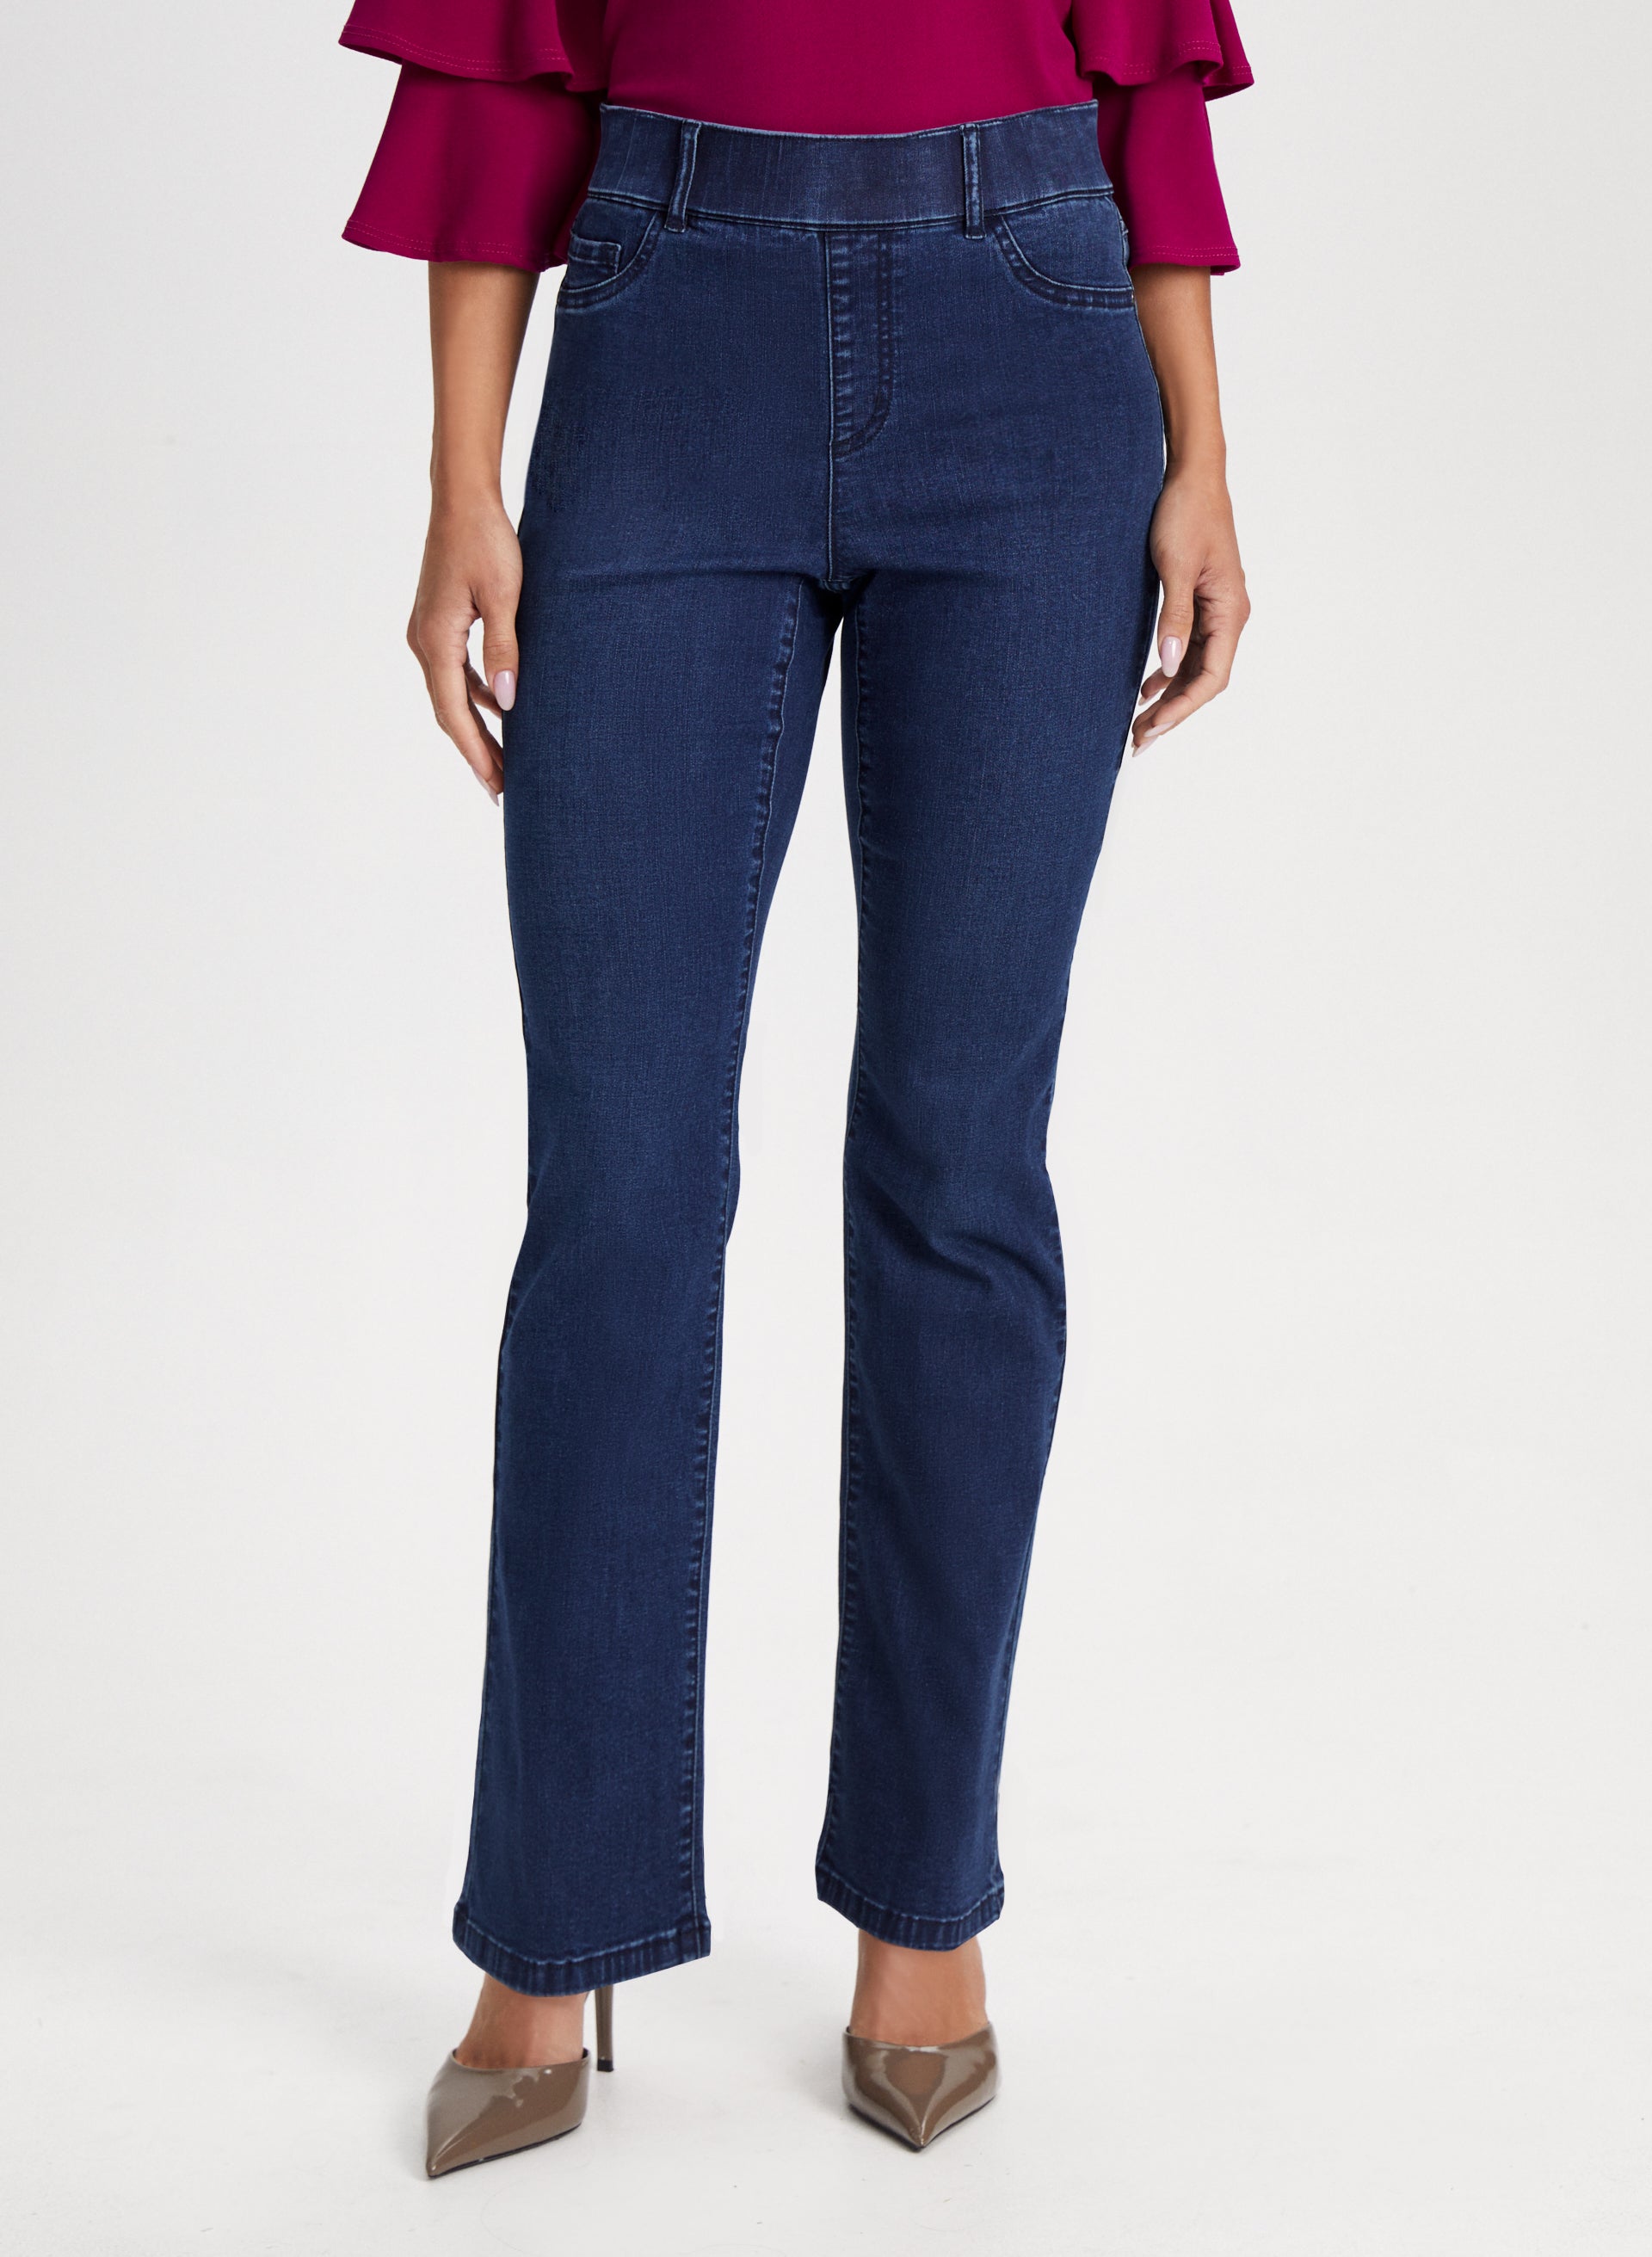 Ultimate Denim Pull-on Bootcut Jeans - Pull On Bootcut Jeans